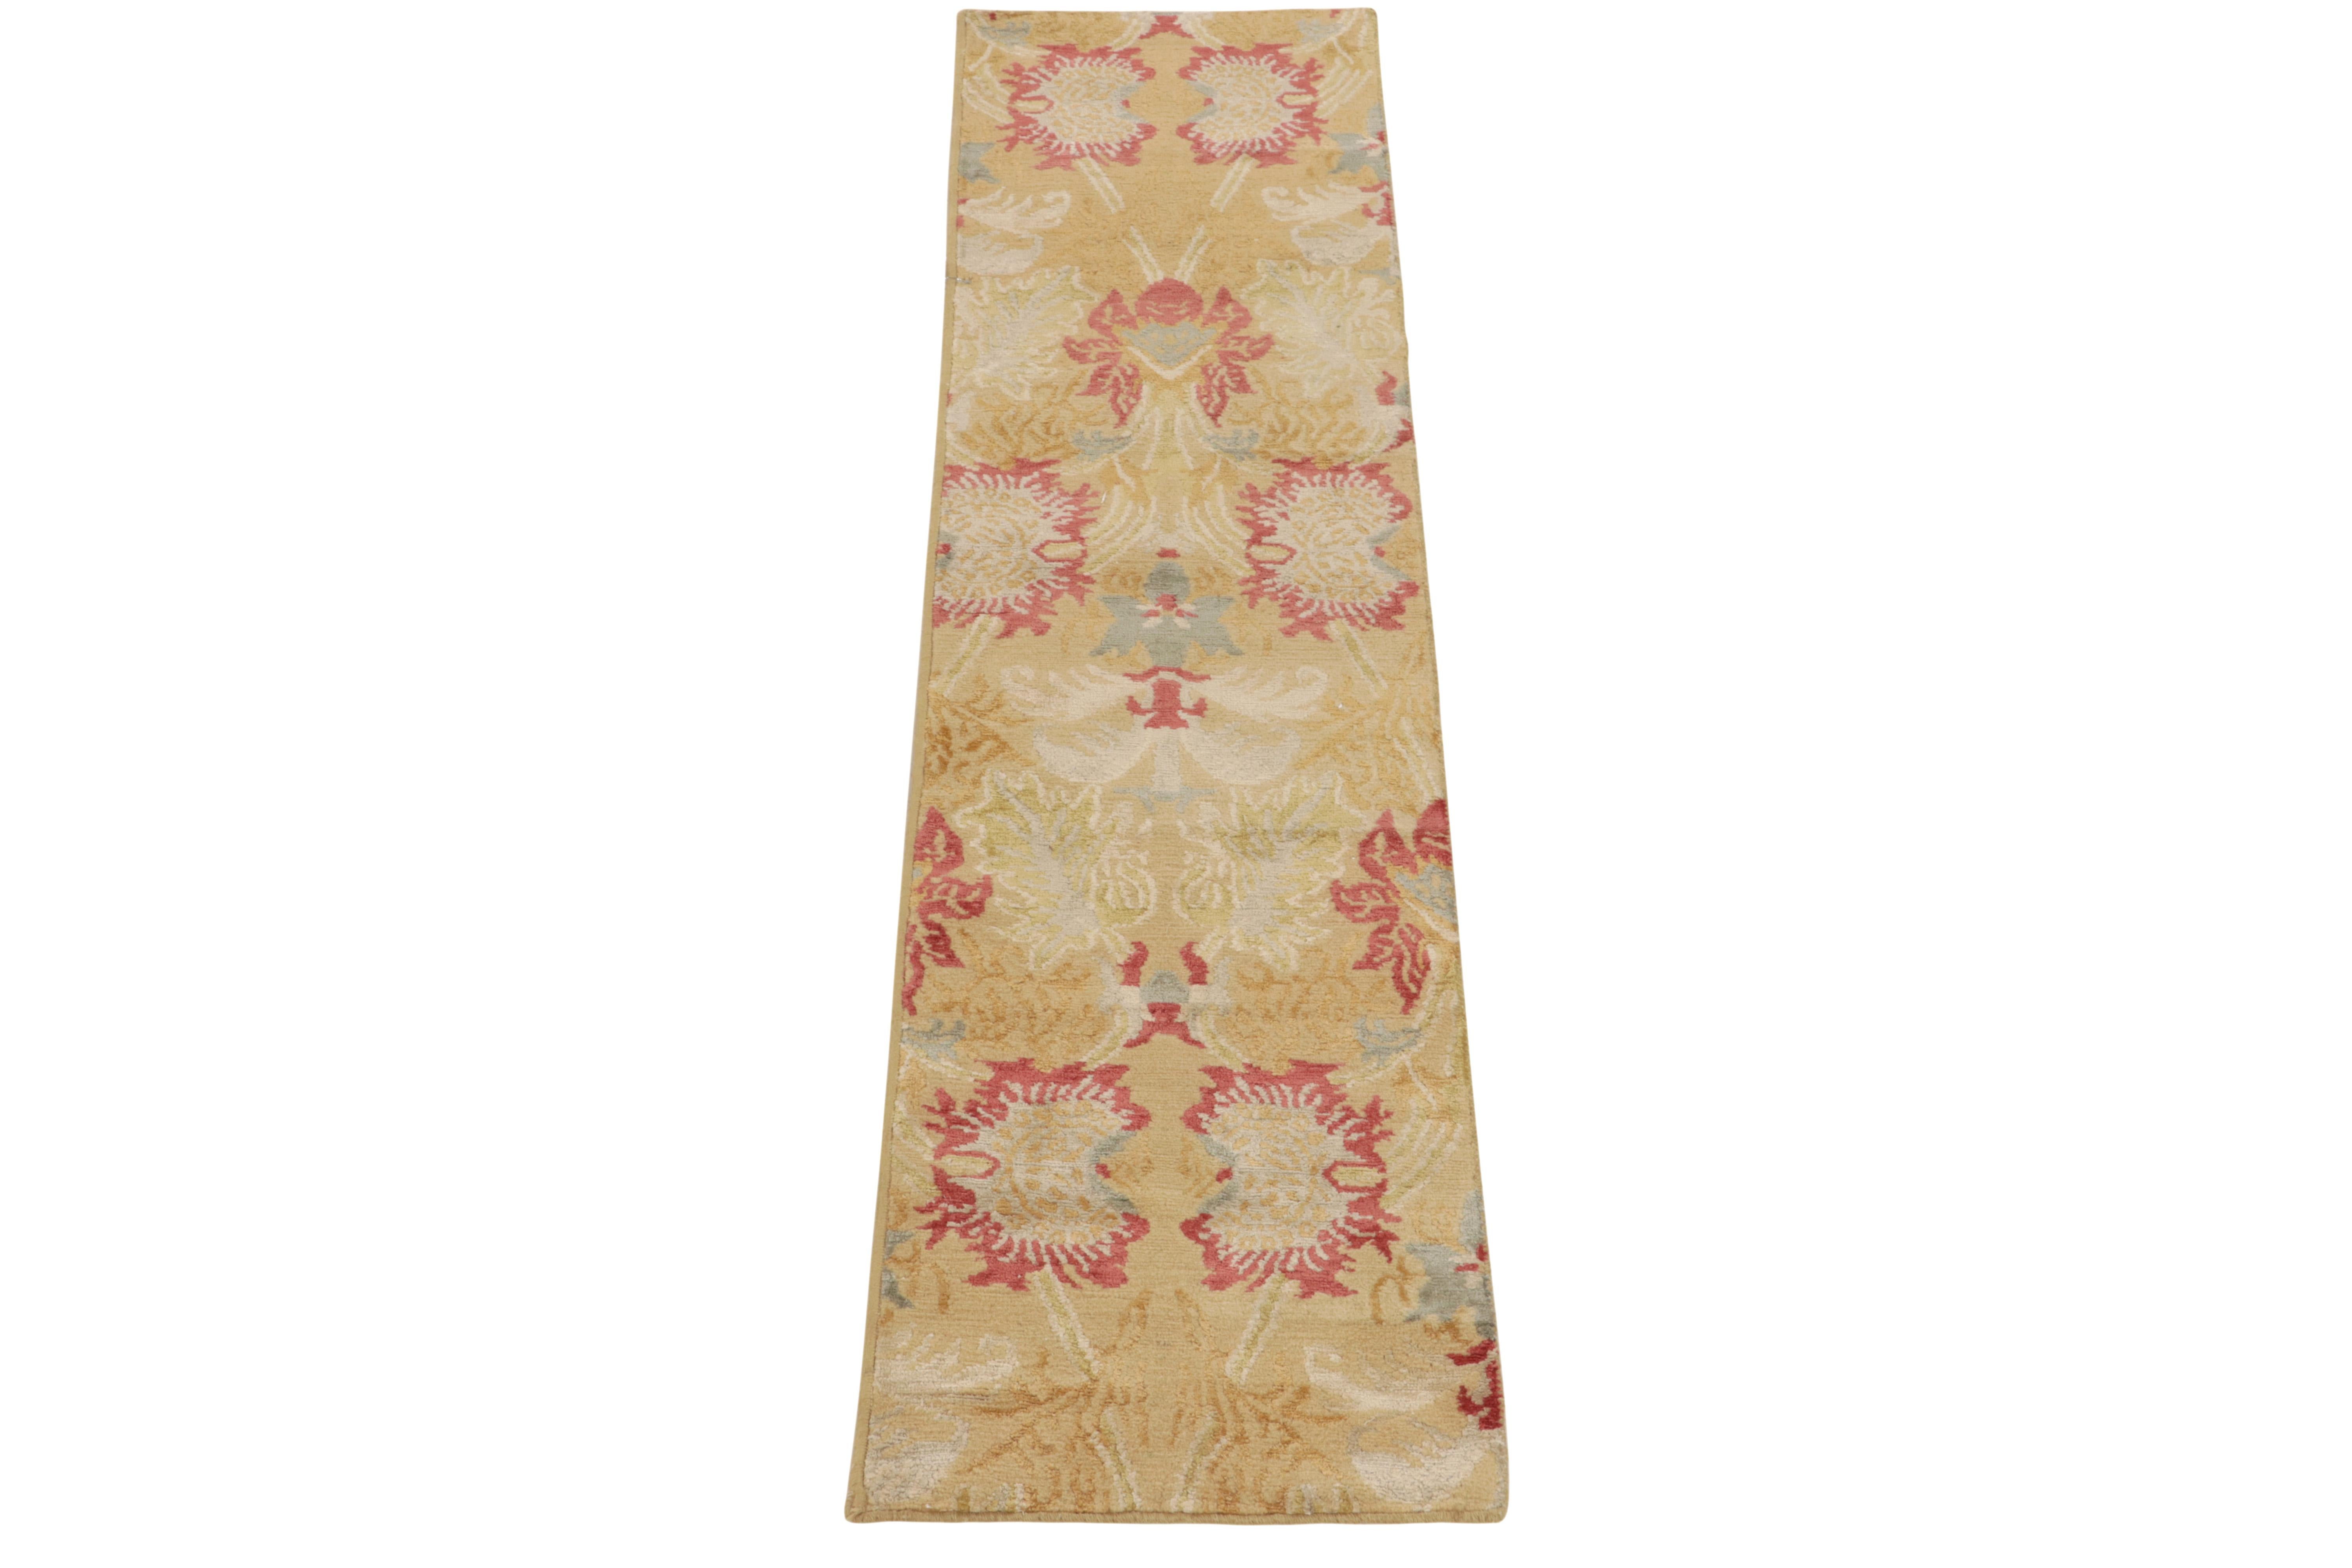 Hand-knotted in luxurious silk, a 1x6 contemporary runner from our European collection. The drawing carries our Toledo design inspired by Spanish antique floral rugs in an alluring play of gold, red, blue & silver-gray for a lustrous appeal. A